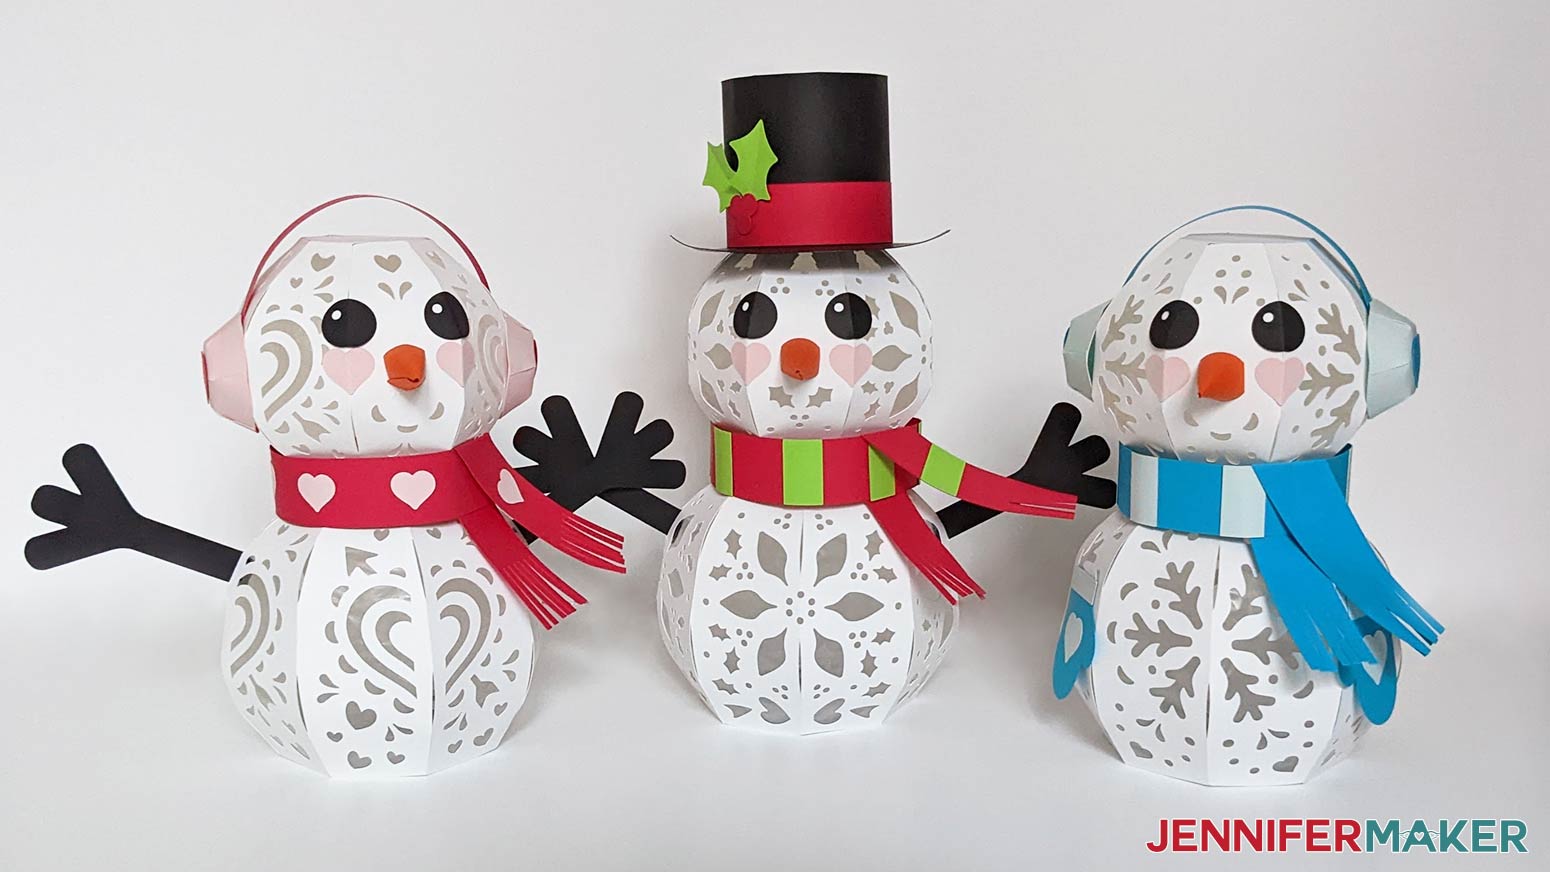 Assembled Valentine's Day, Christmas, and Winter light up paper snowmen placed side by side